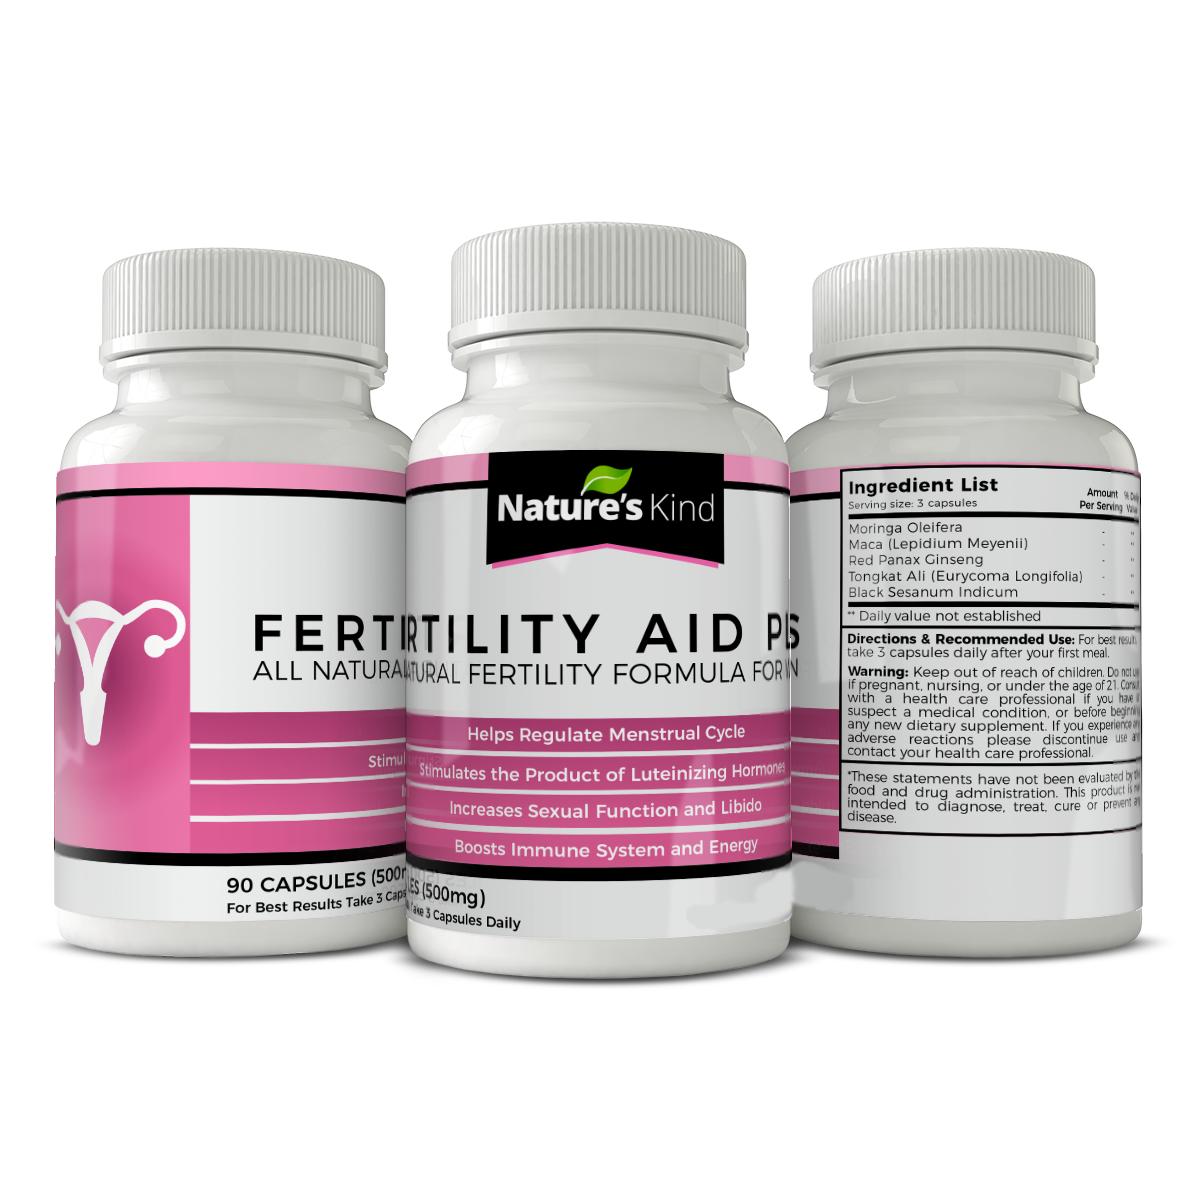 Fertility Aid Plus for Women - FerteeAid Pregnant Formula for Females ★ Also helps with PCOS